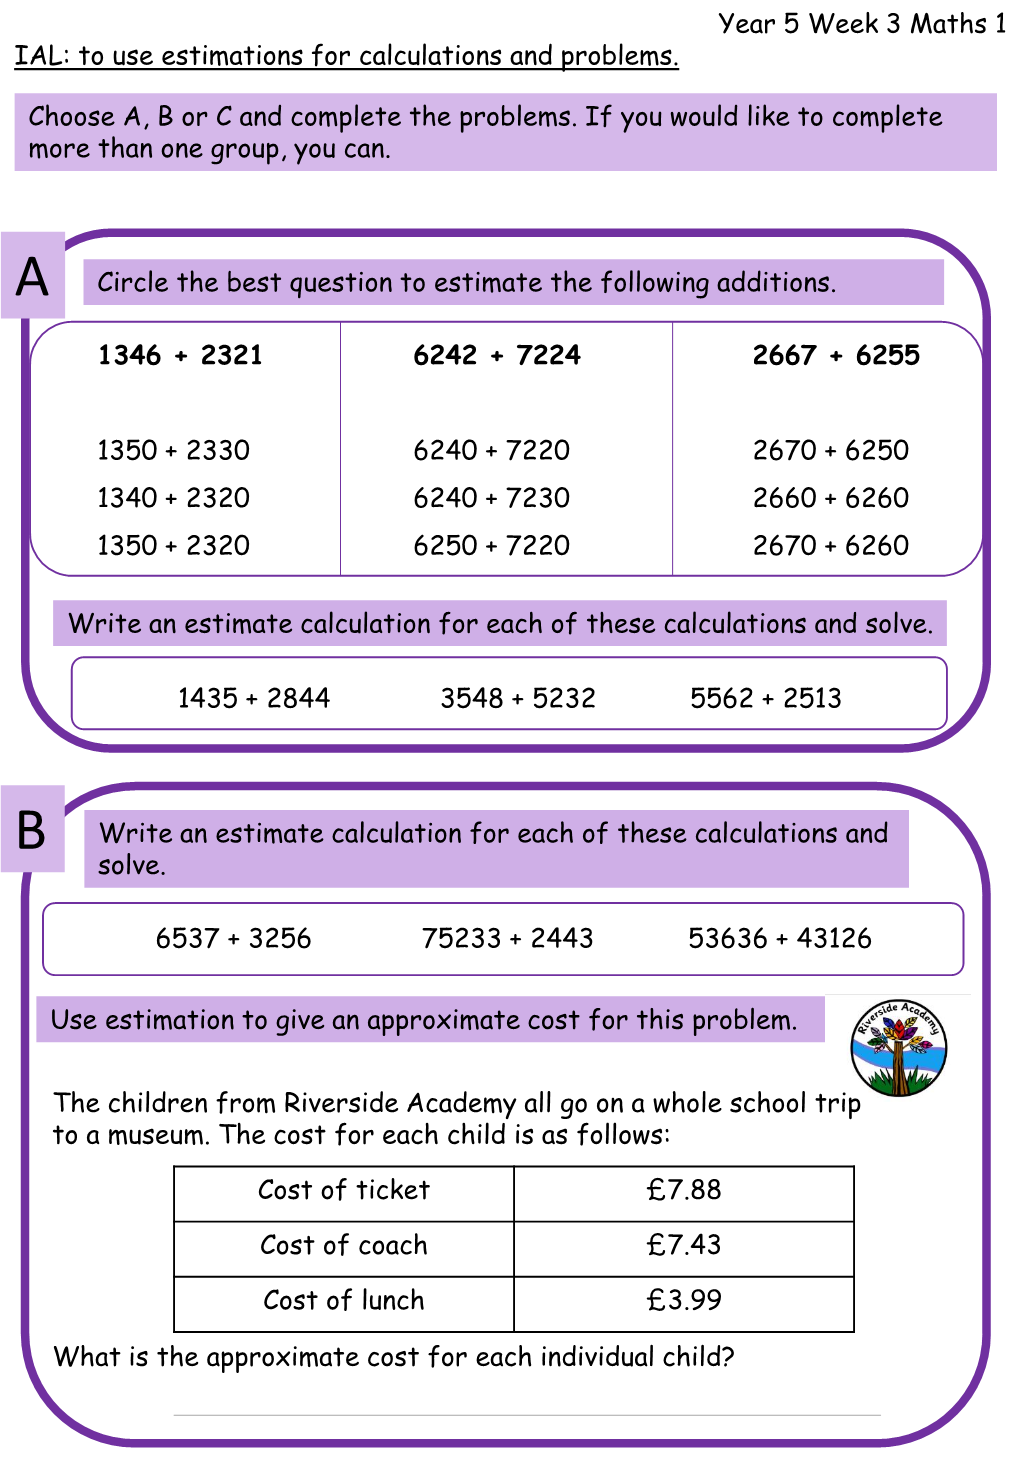 Week 3 Maths 1 IAL: to Use Estimations for Calculations and Problems